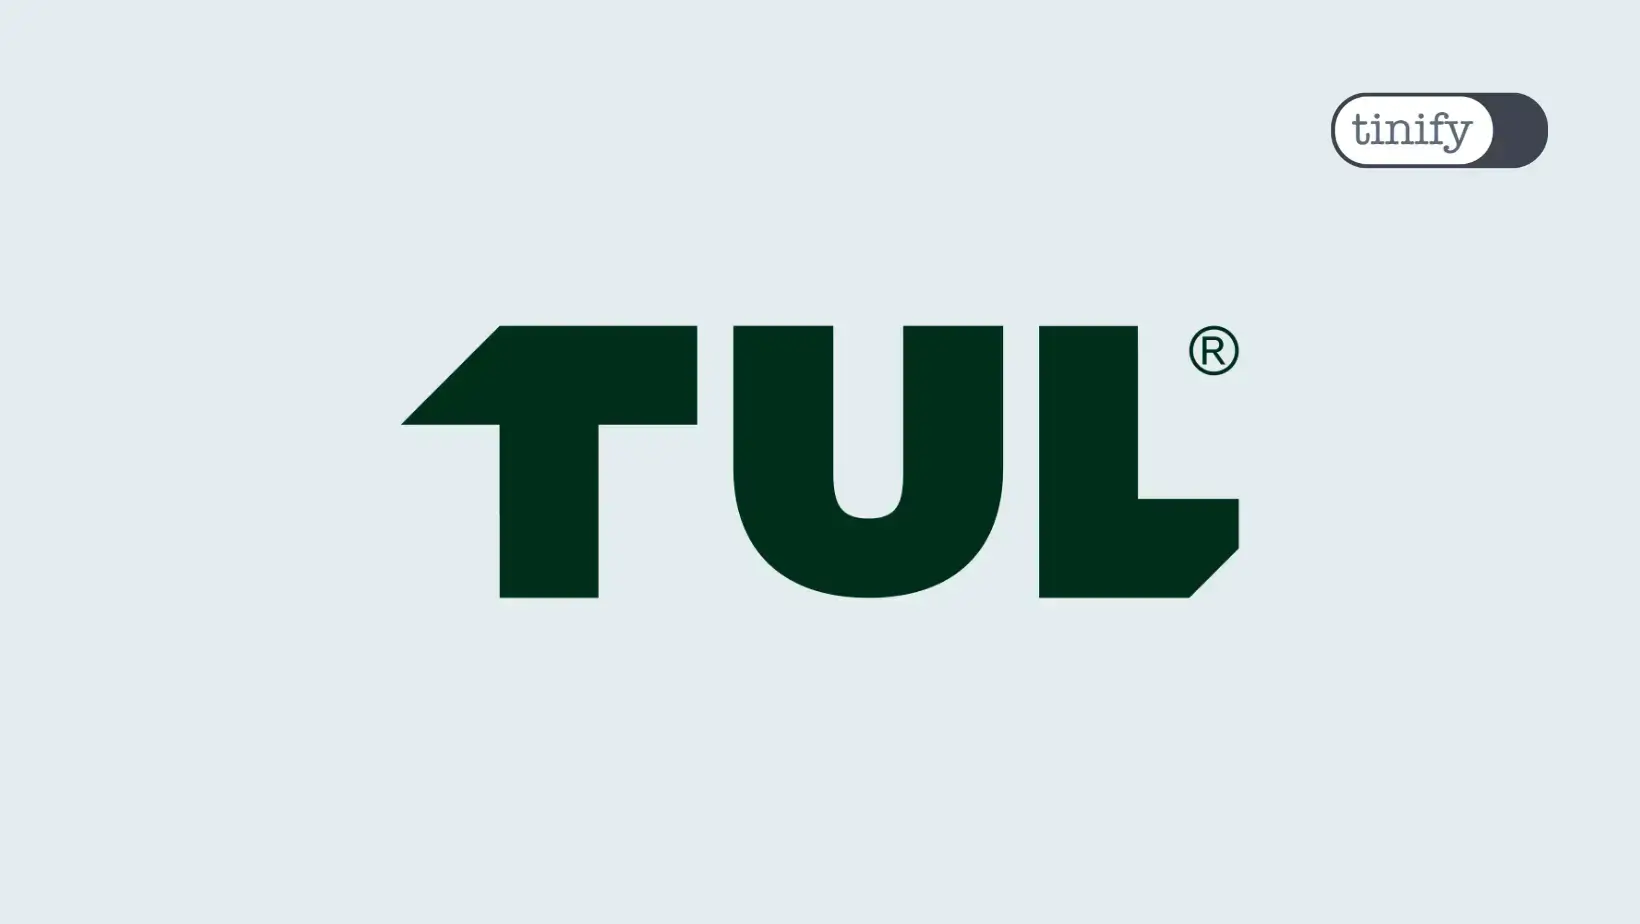 Customer story: Tinify’s API optimizes images for construction material marketplace app Tul